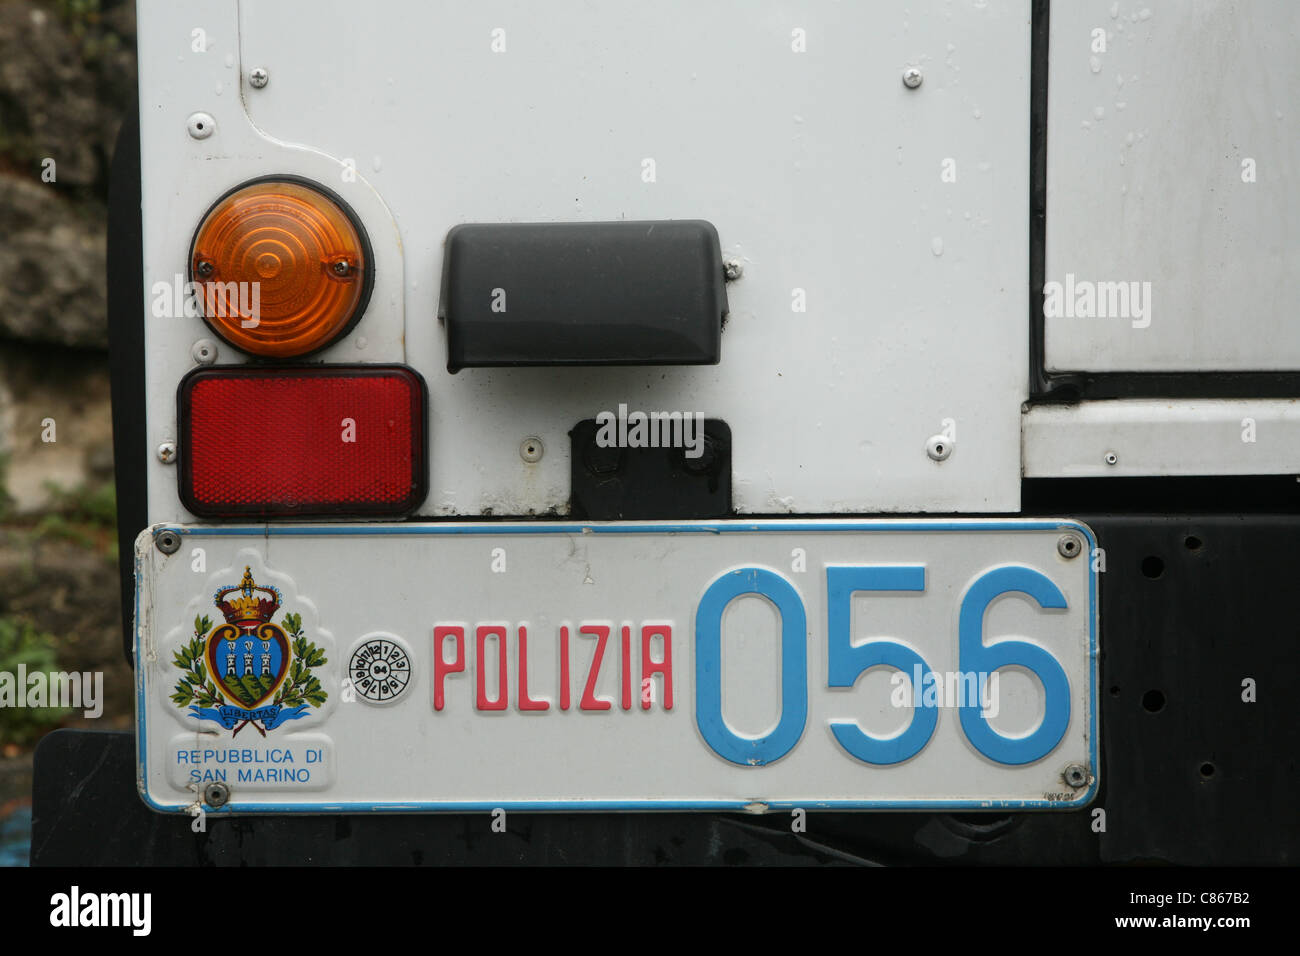 Coat of arms of the Republic of San Marino on the vehicle registration plate of a police car in the City of San Marino (Città di San Marino). Stock Photo